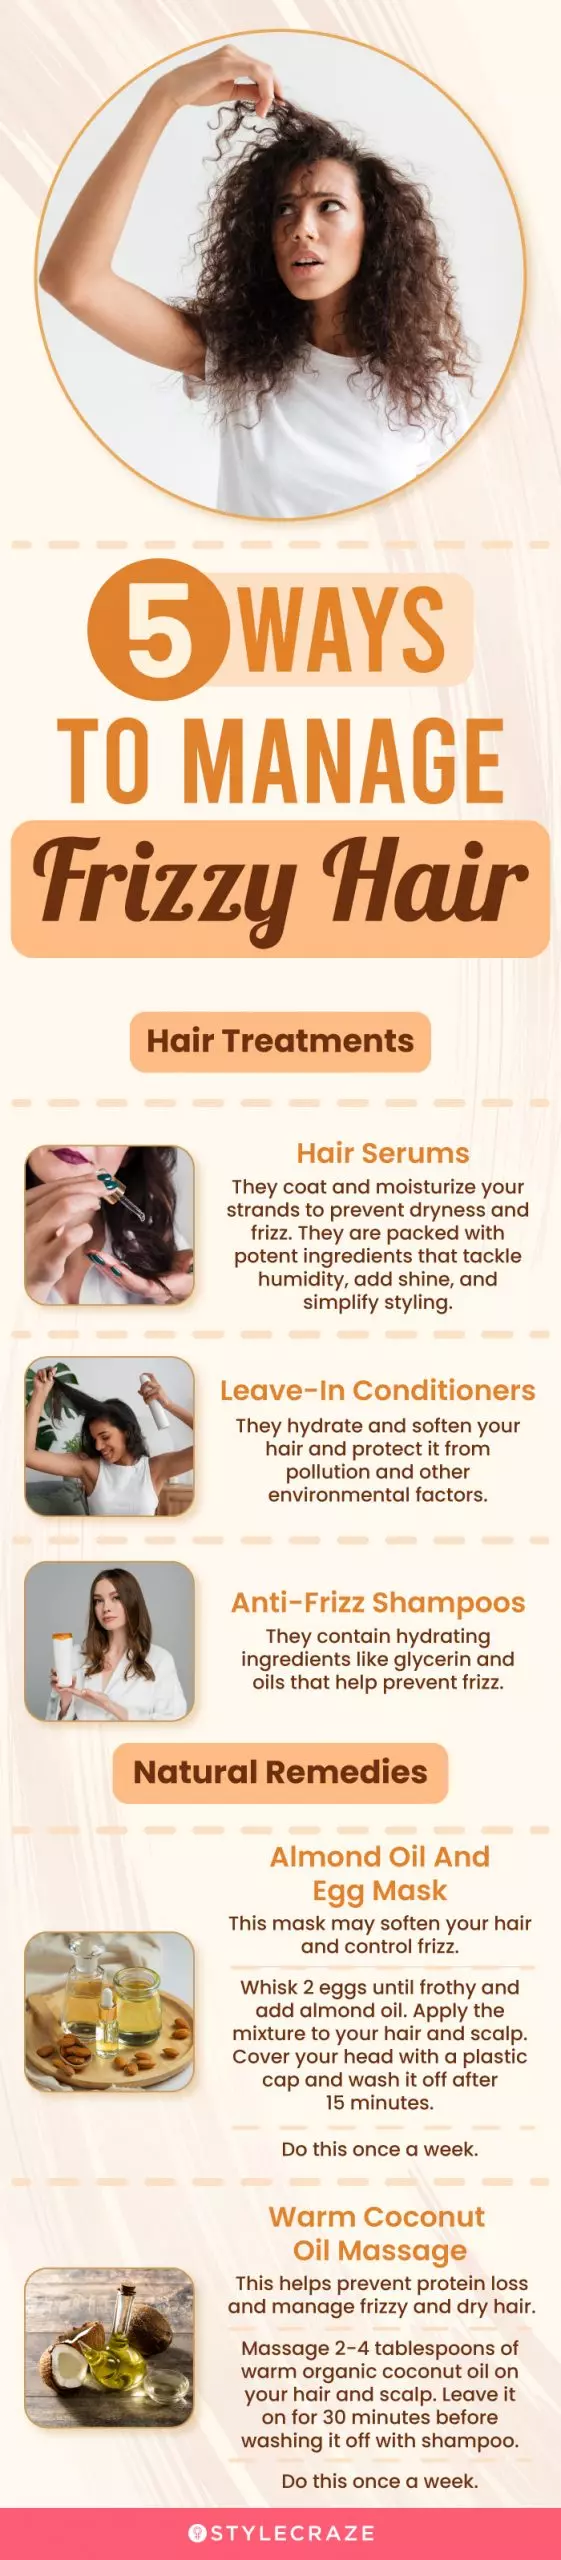 5 ways to manage frizzy hair (infographic)